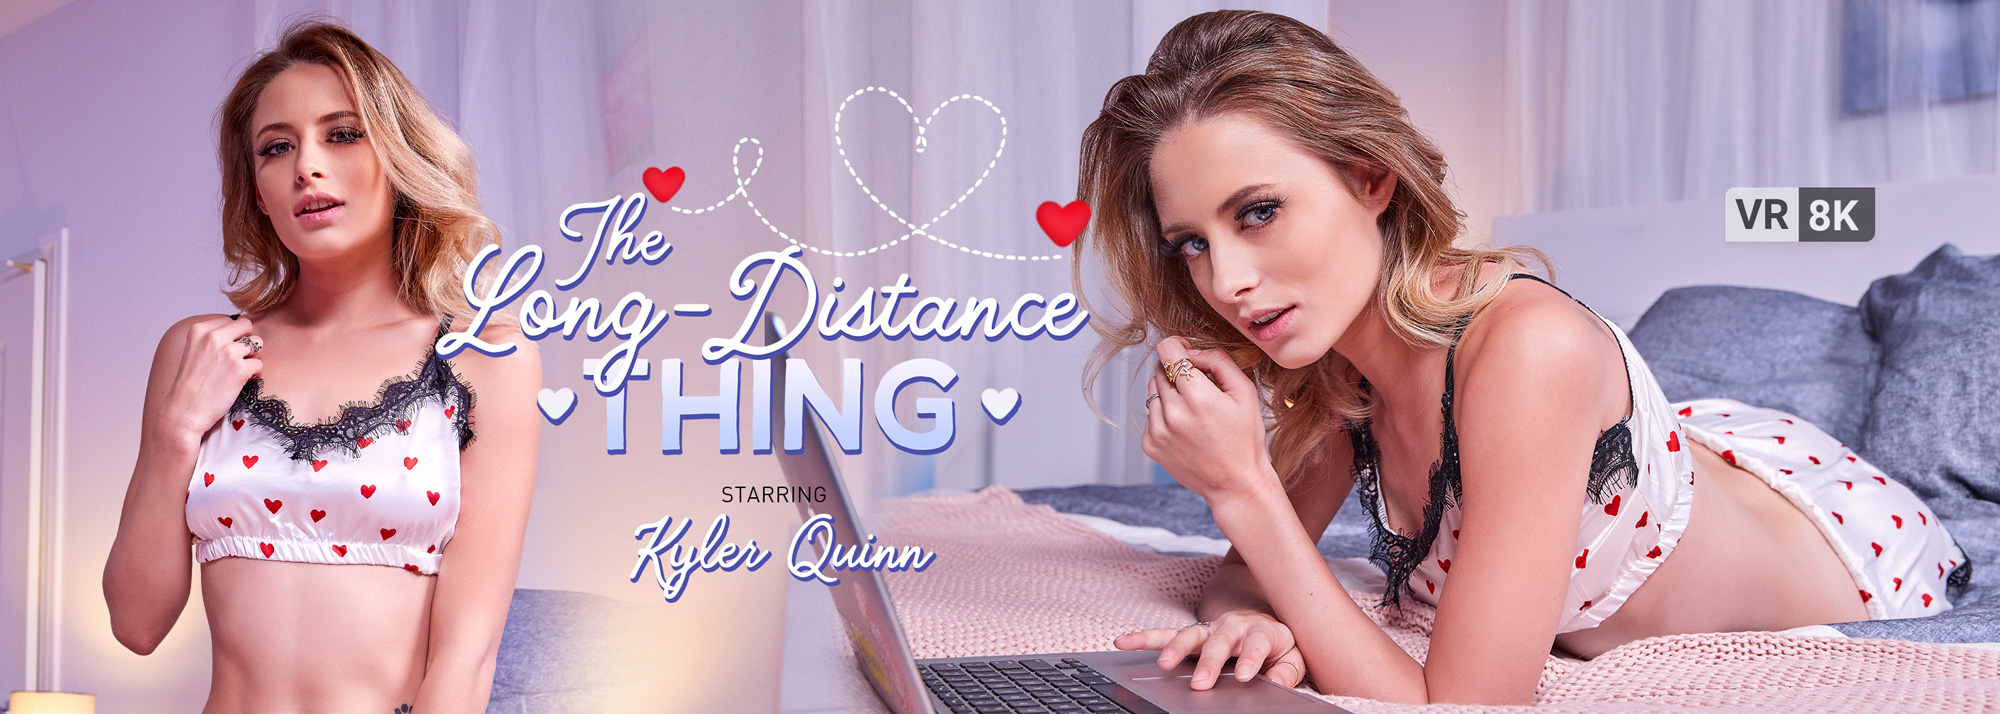 The Long-Distance Thing with Kyler Quinn  Slideshow